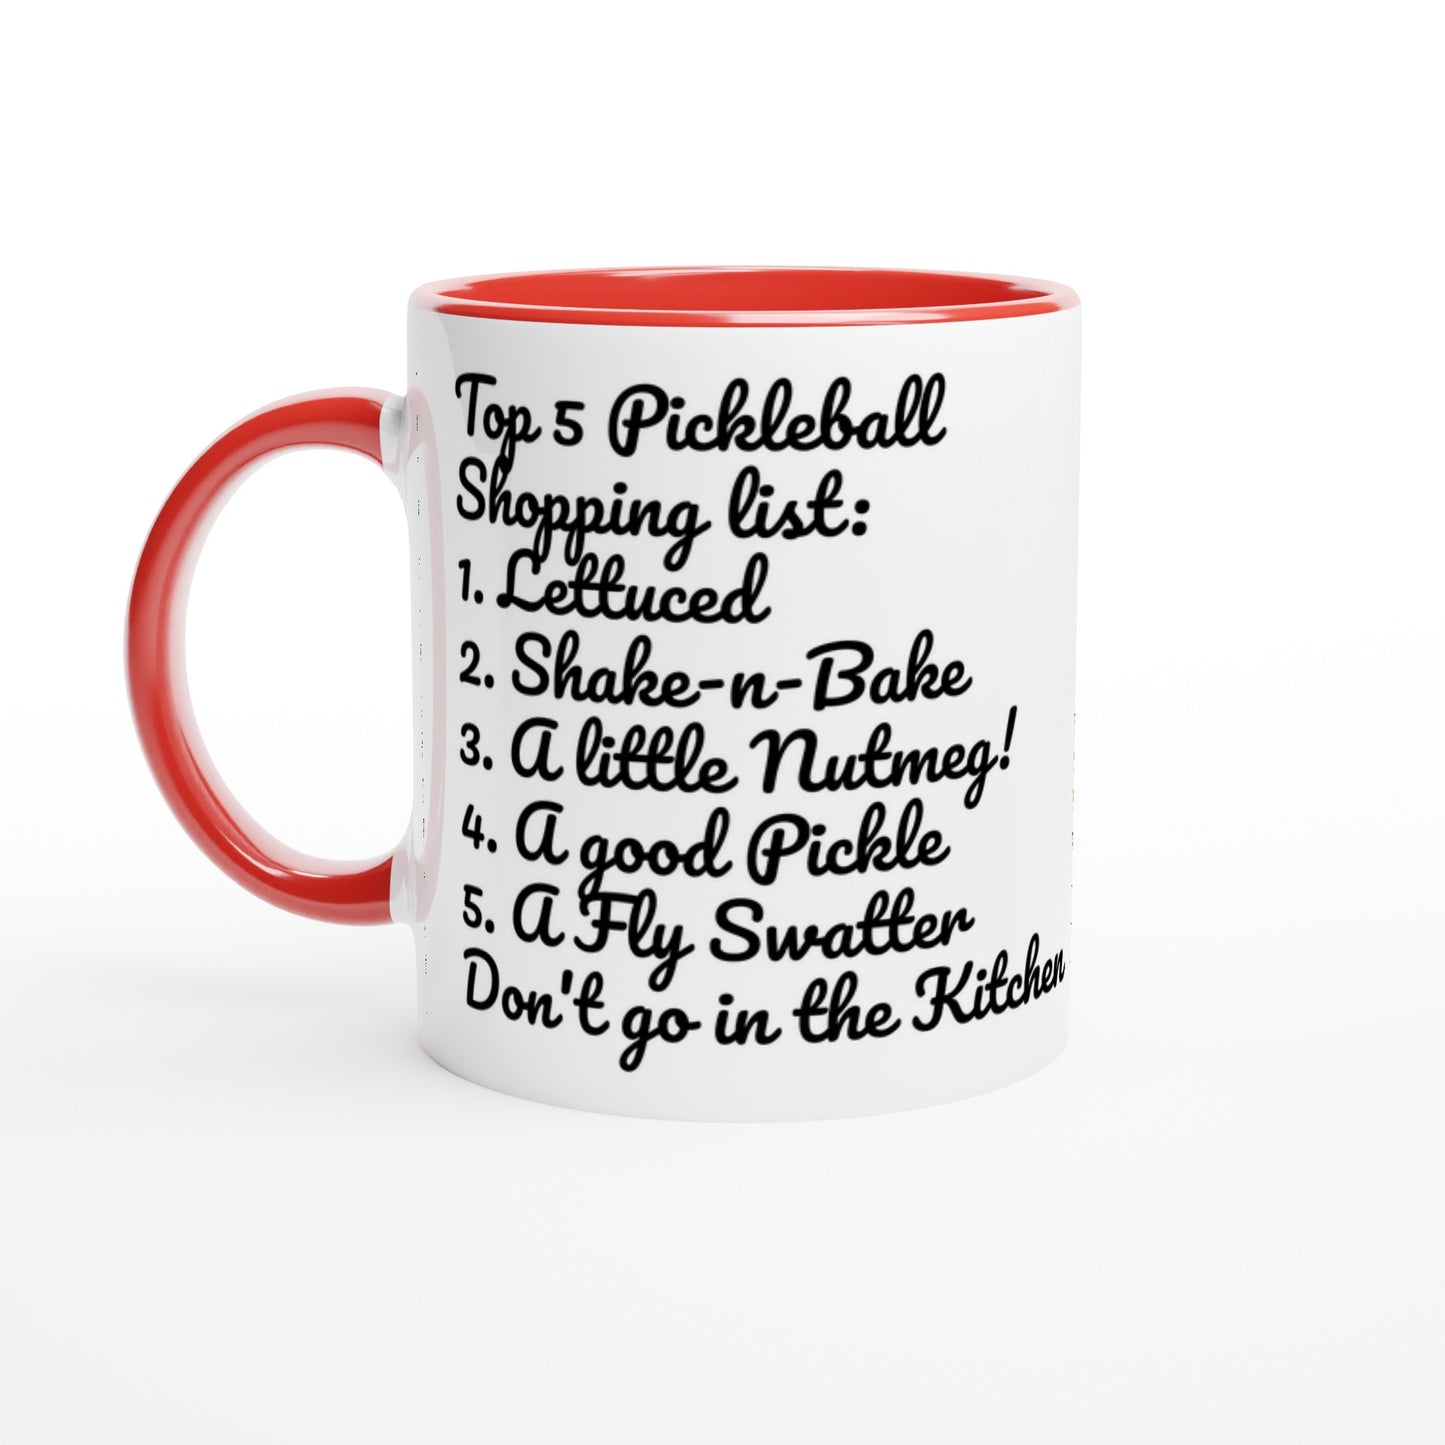 White ceramic 11oz mug with red handle original motto Top 5 Pickleball Shopping list lettuce, Shake-n-bake, Nutmeg, Pickle, a Fly Swatter Don’t go in the kitchen front side and Let's Play PickleBall logo on back dishwasher and microwave safe ceramic coffee mug from WhatYa Say Apparel front view.